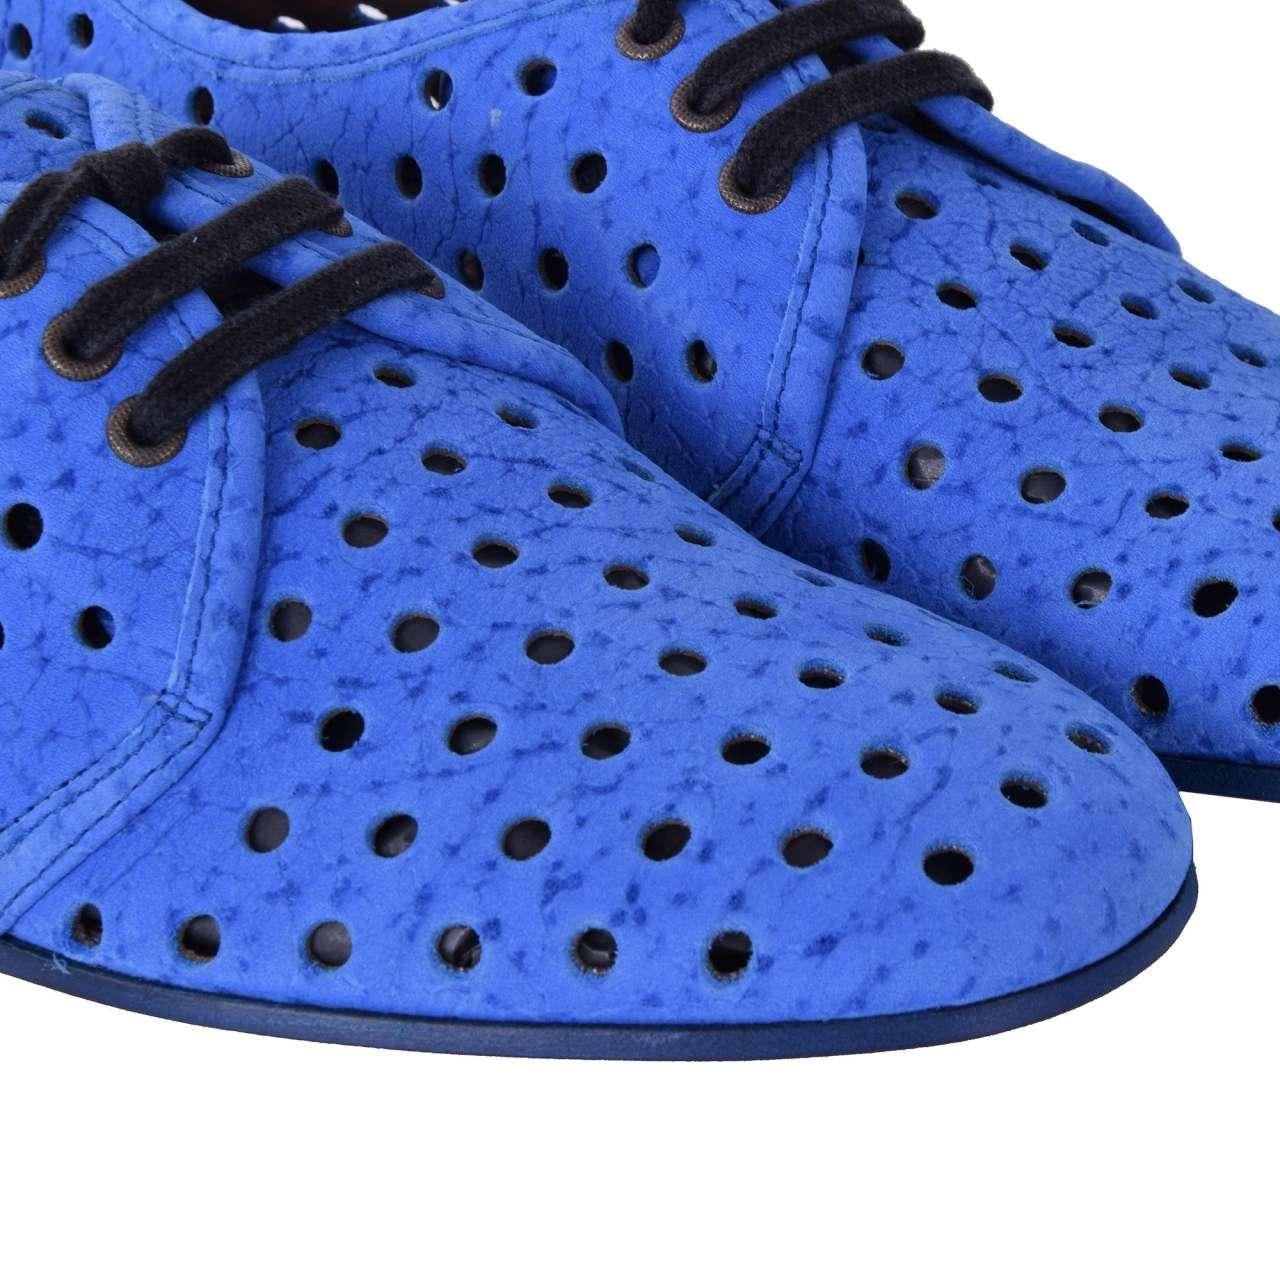 Dolce & Gabbana - Perforated Shoes AMALFI Blue EUR 39 In Excellent Condition For Sale In Erkrath, DE